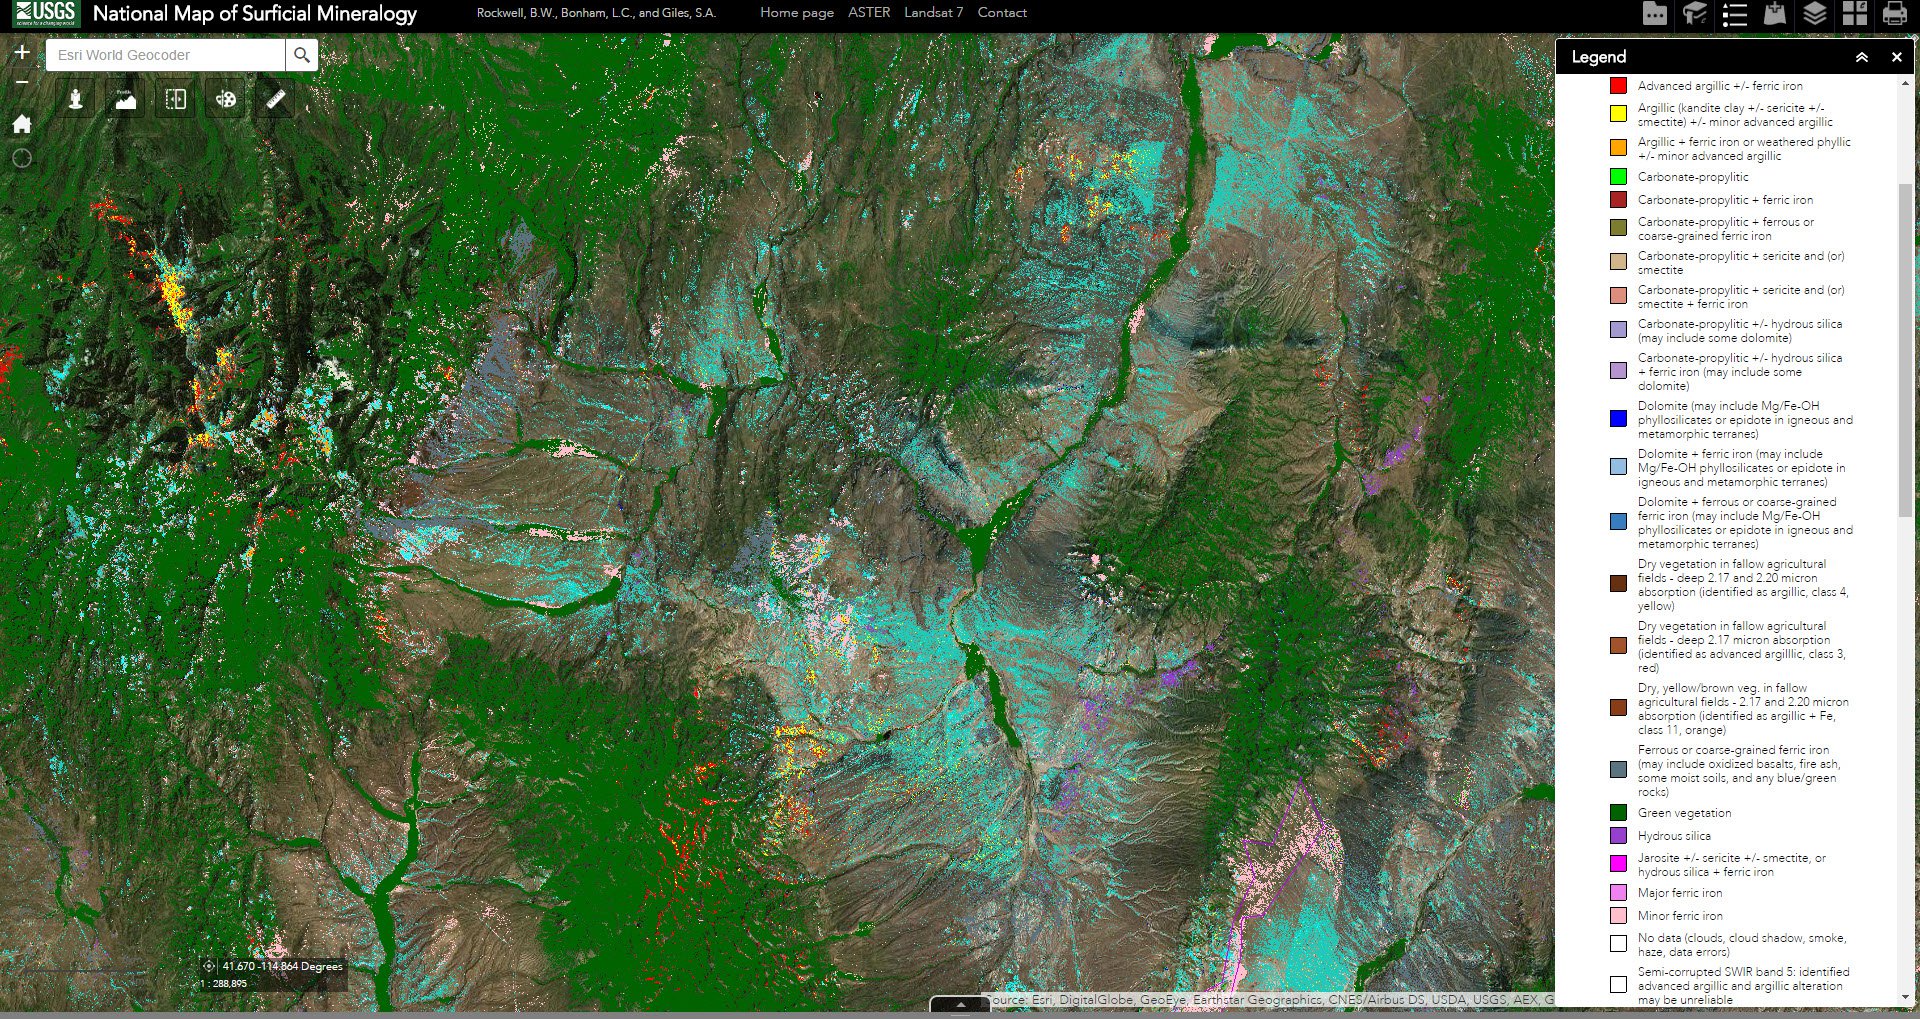 Screen shot of ASTER data over Elko County, Nevada, United States from the National Map of Surficial Mineralogy.